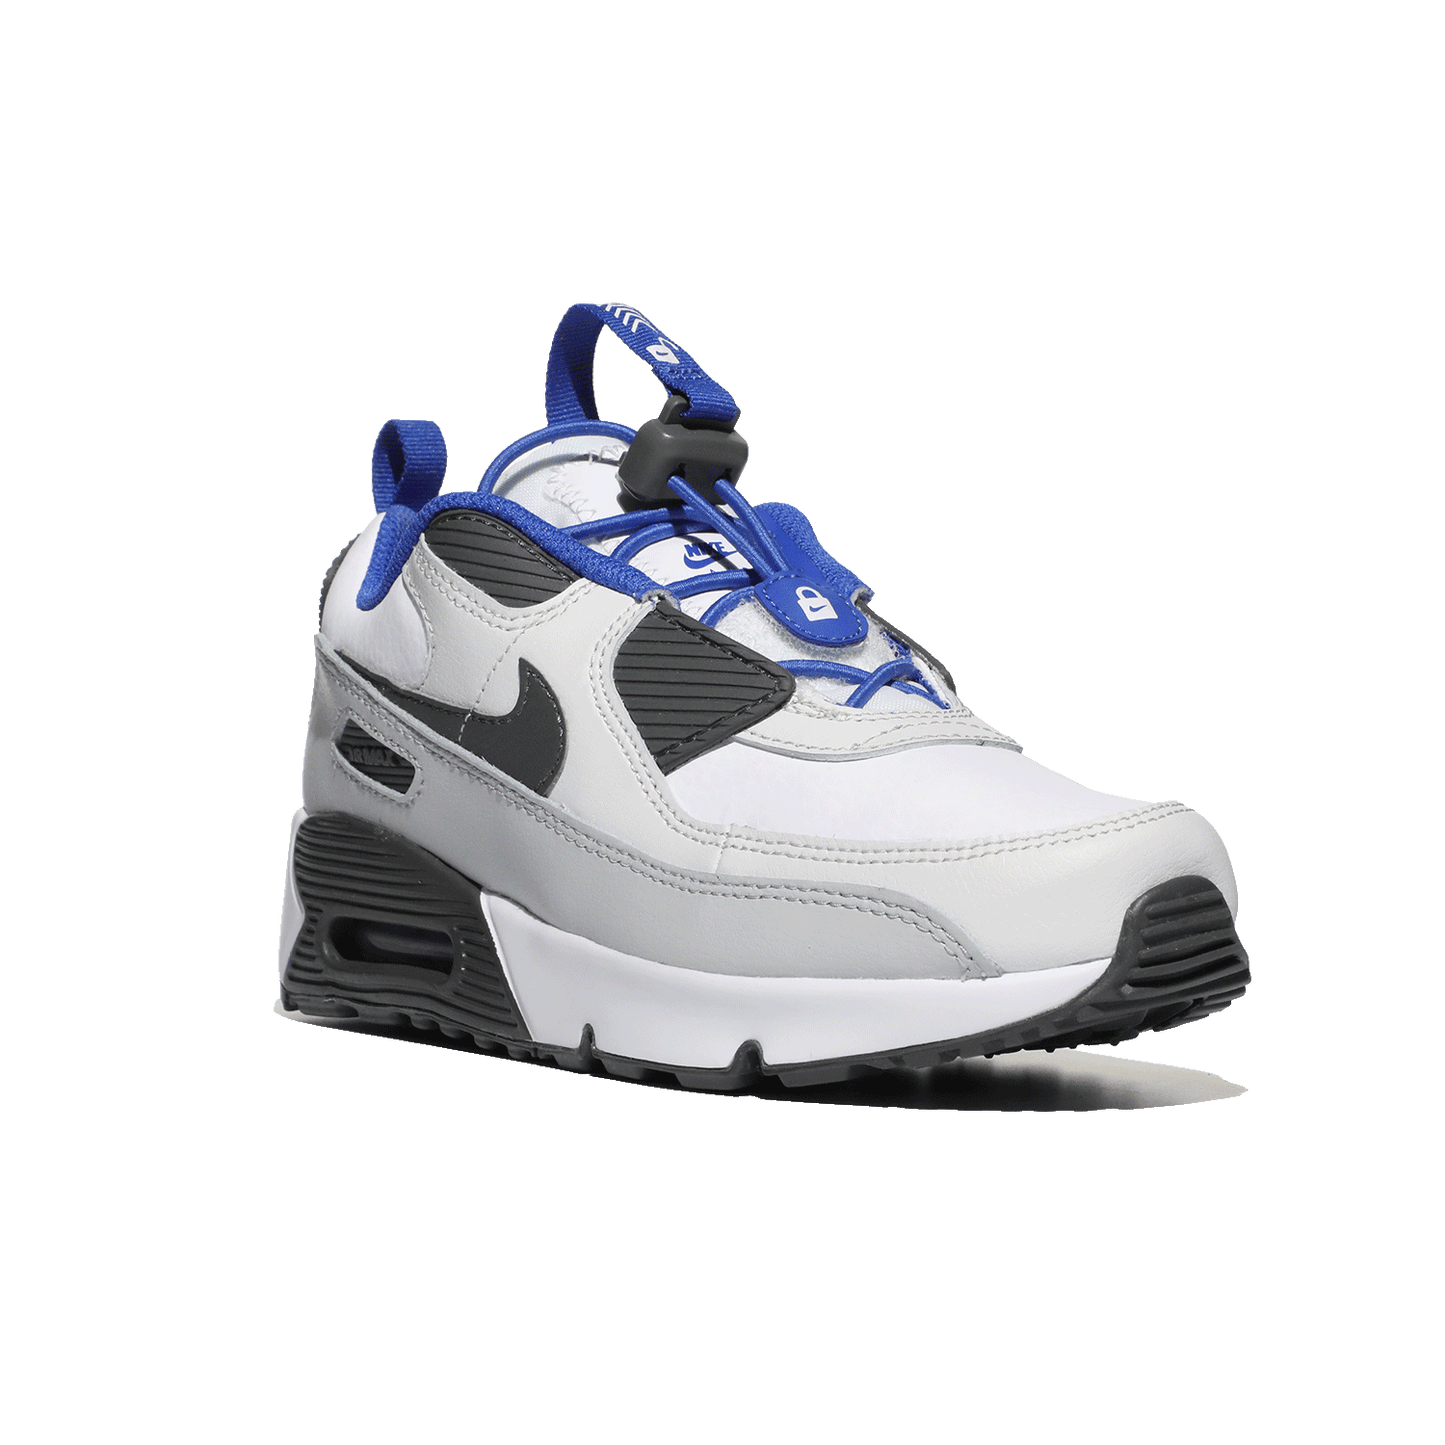 Image 3 of Air Max 90 Toggle (Little Kid)